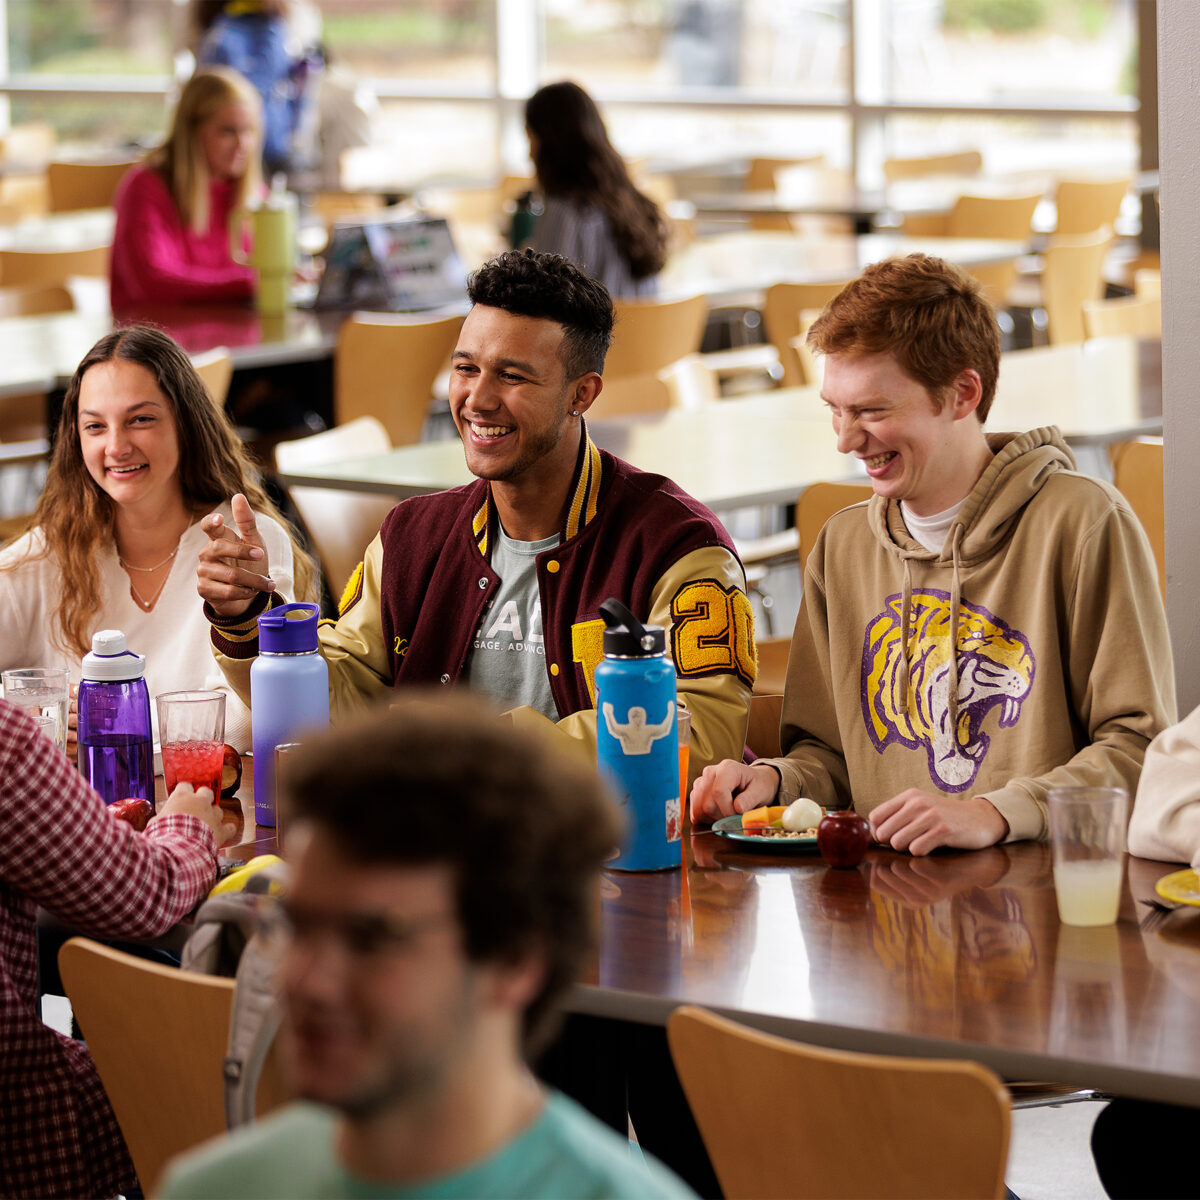 Group of students enjoying a meal together in the campus dining hall